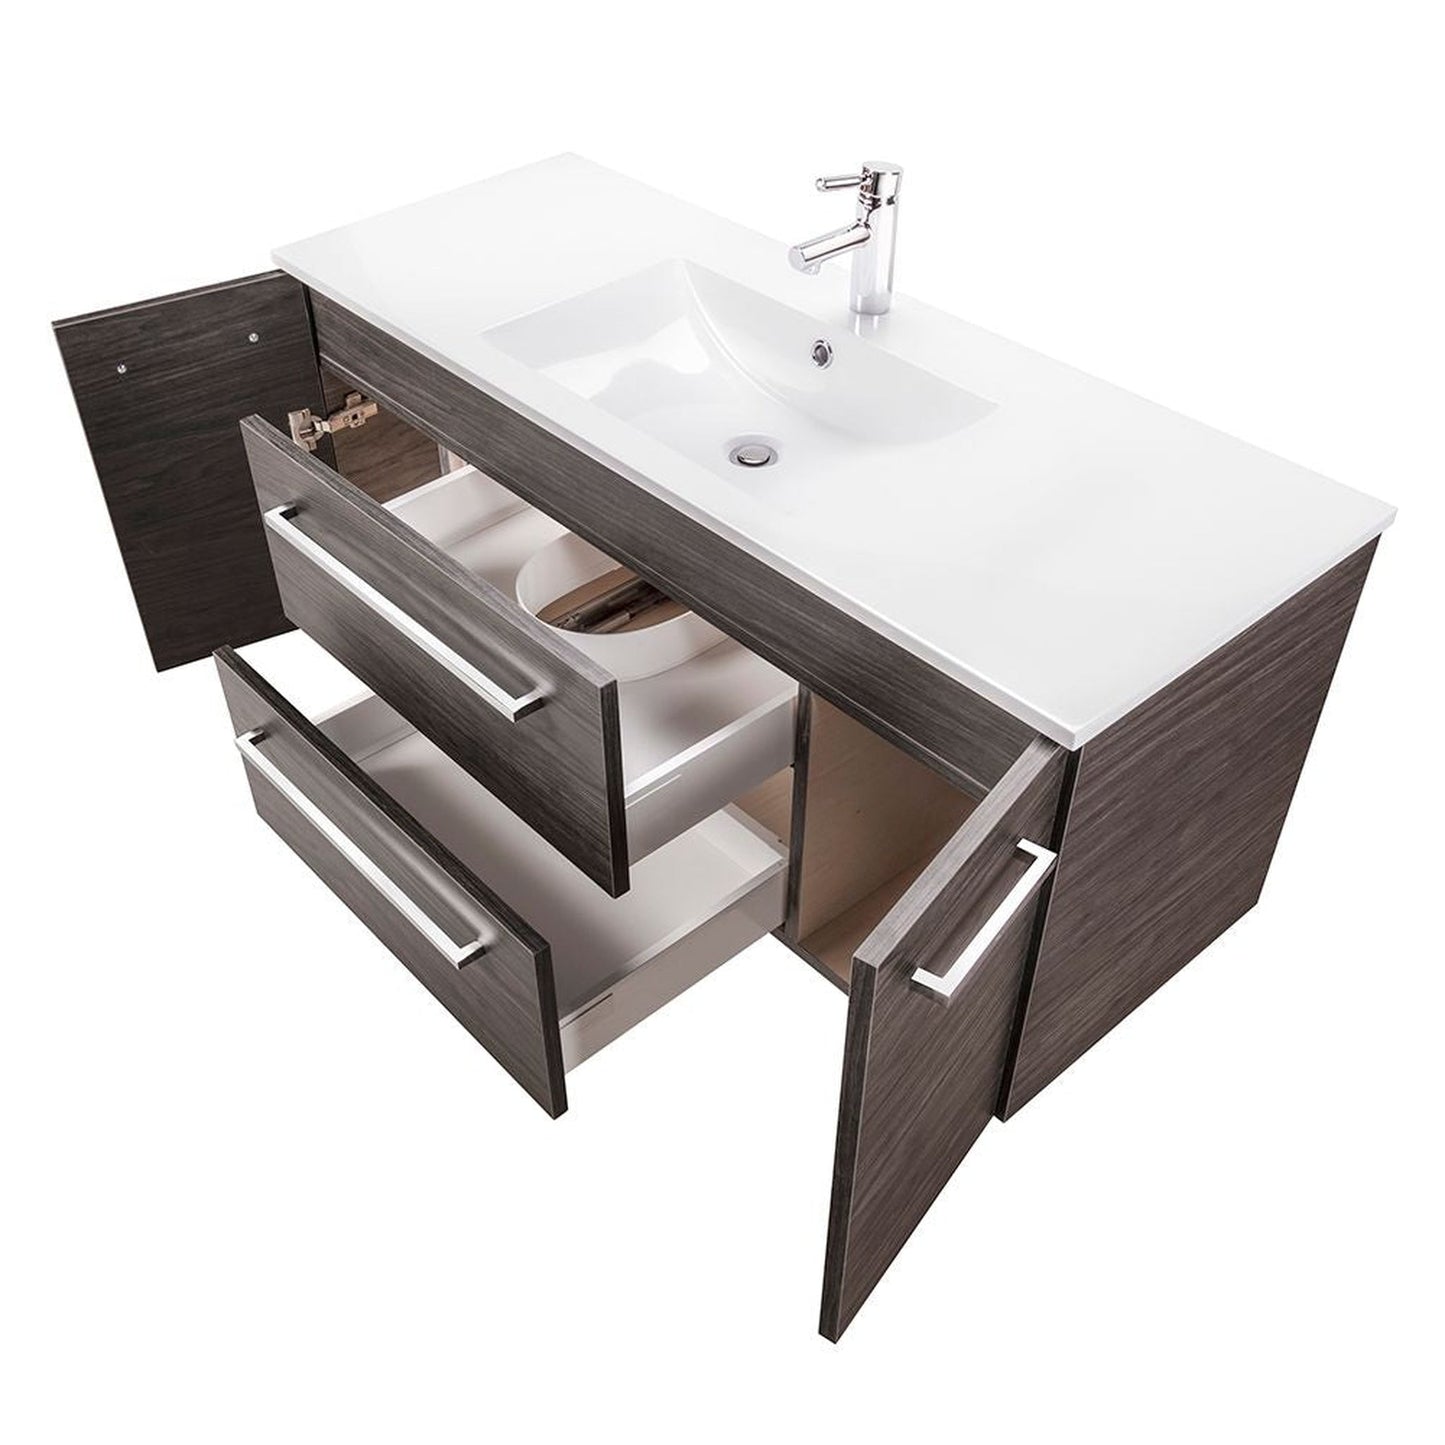 Abby Bath Aiden 48” x 20” Wall-Mounted Vanity in Noir Finish With Two Drawers and Chrome Handles